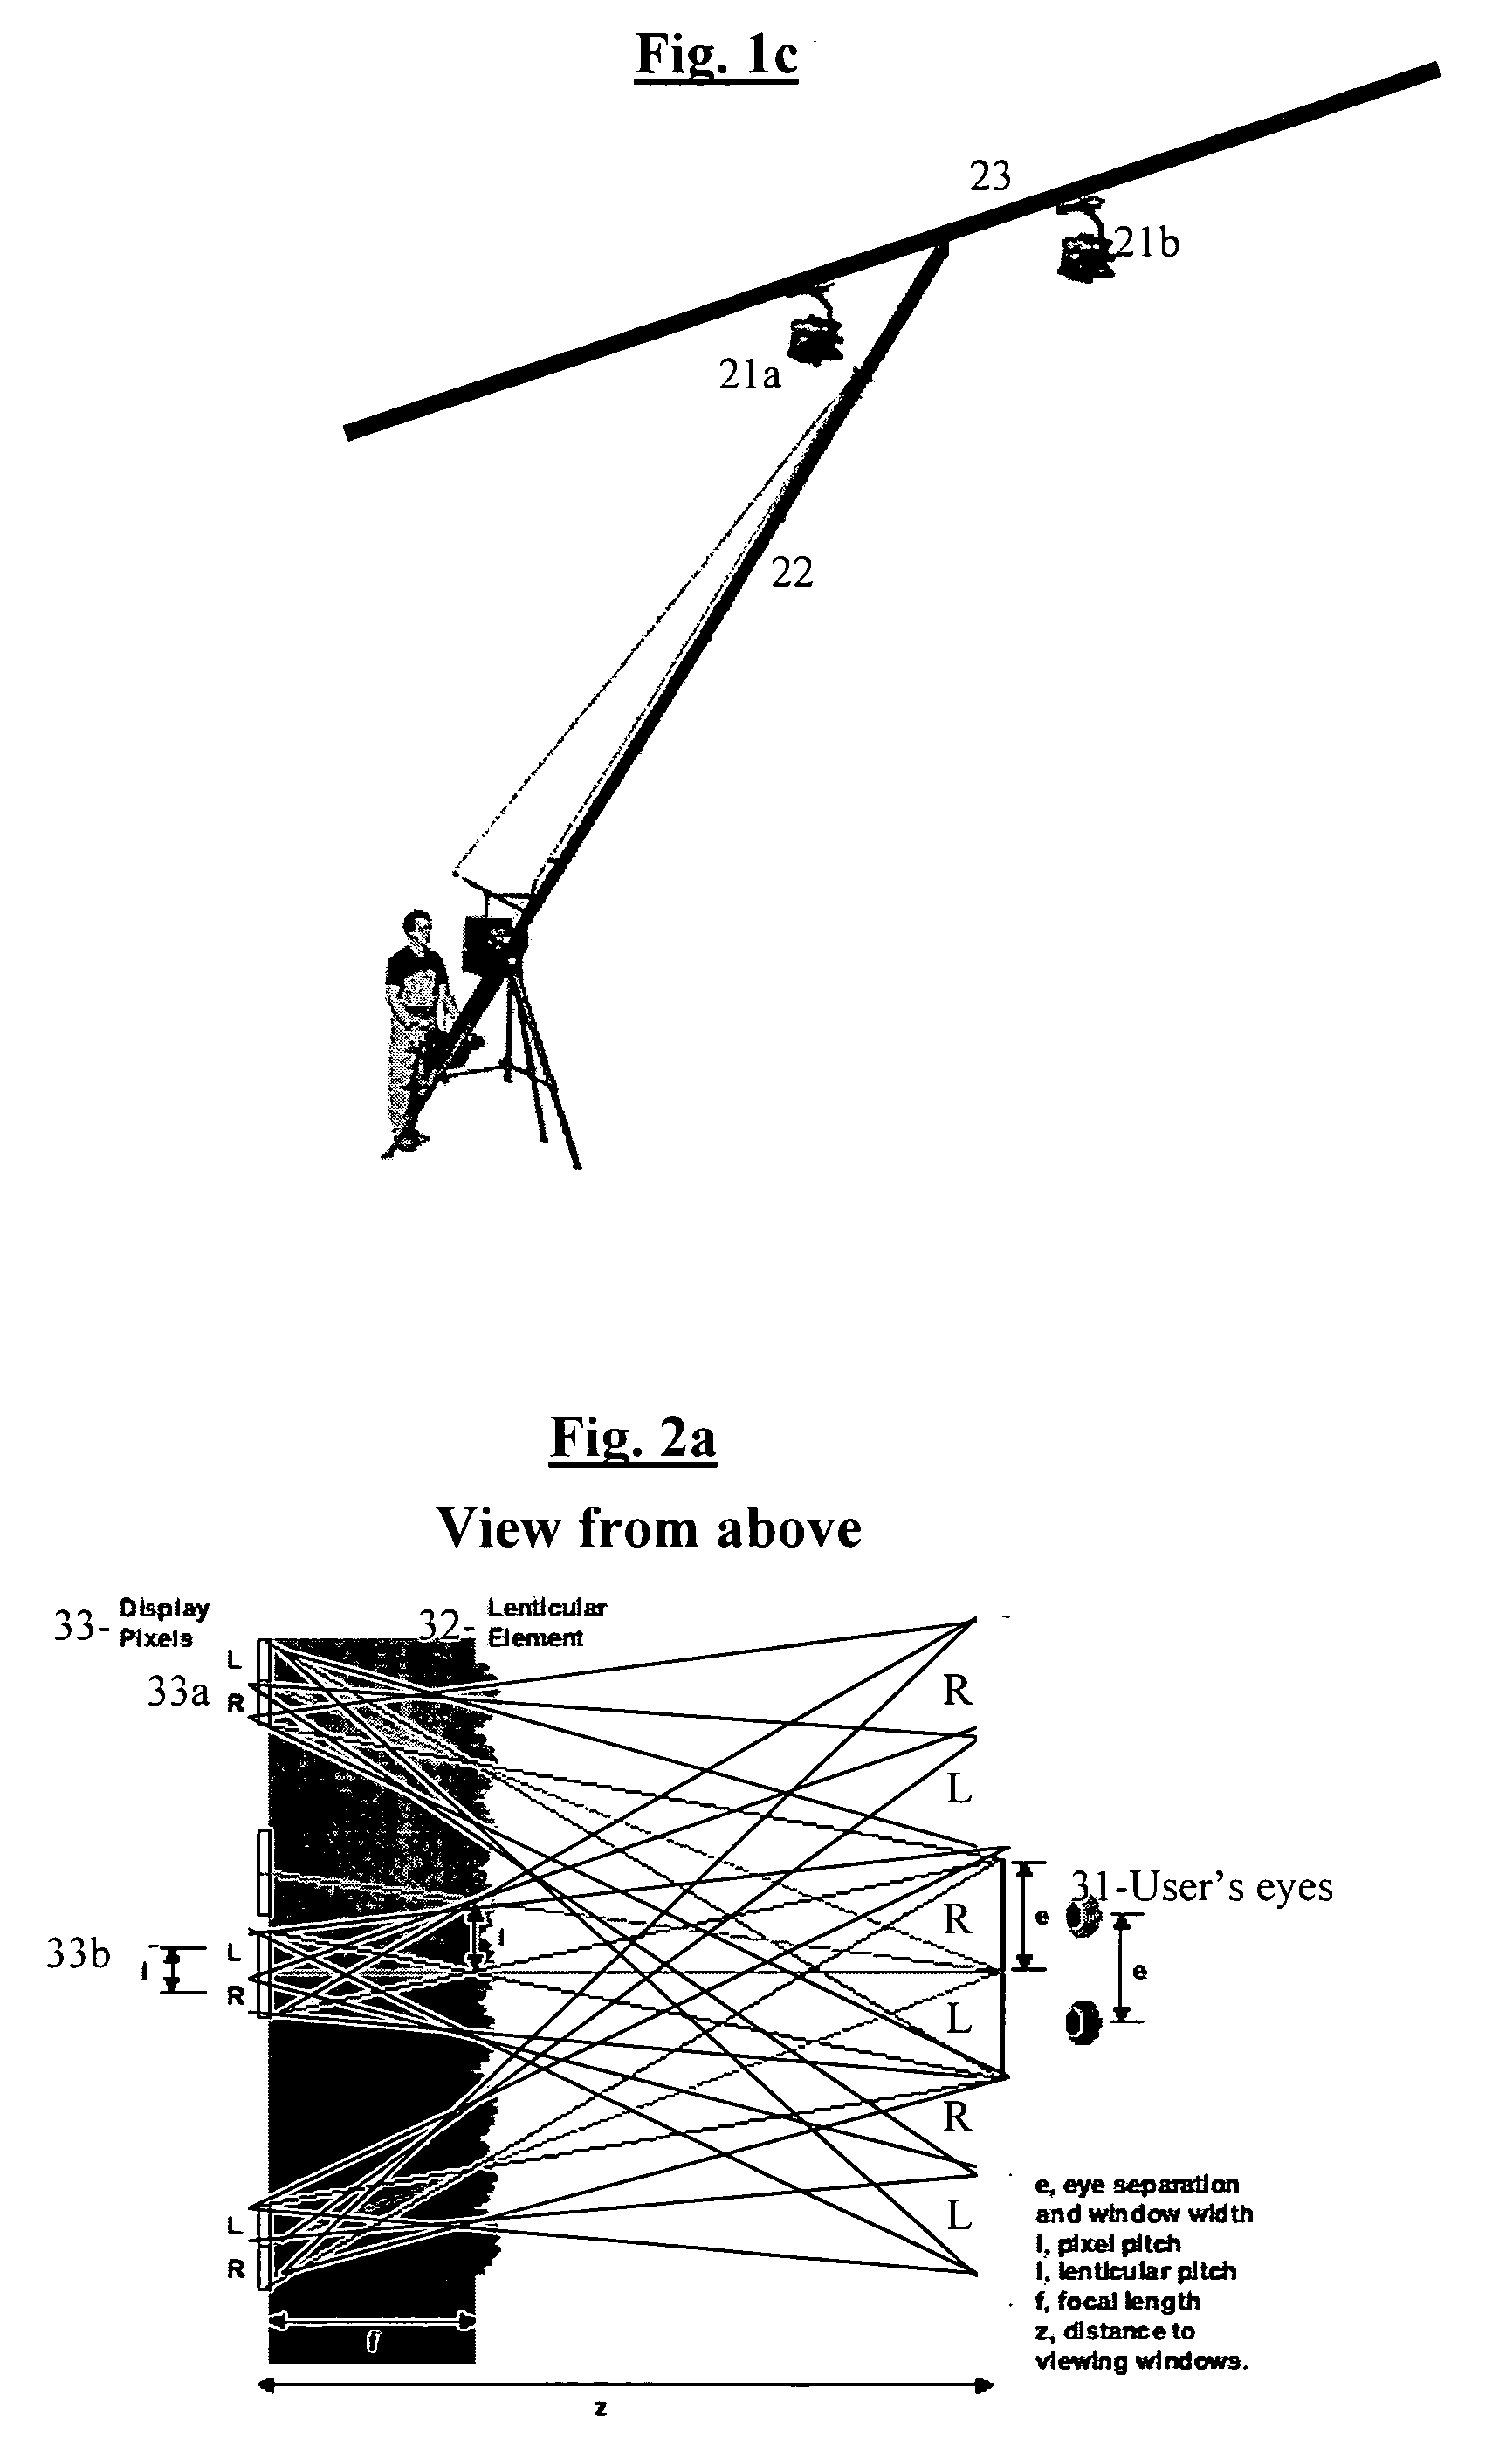 System and method for 3D photography and/or analysis of 3D images and/or display of 3D images